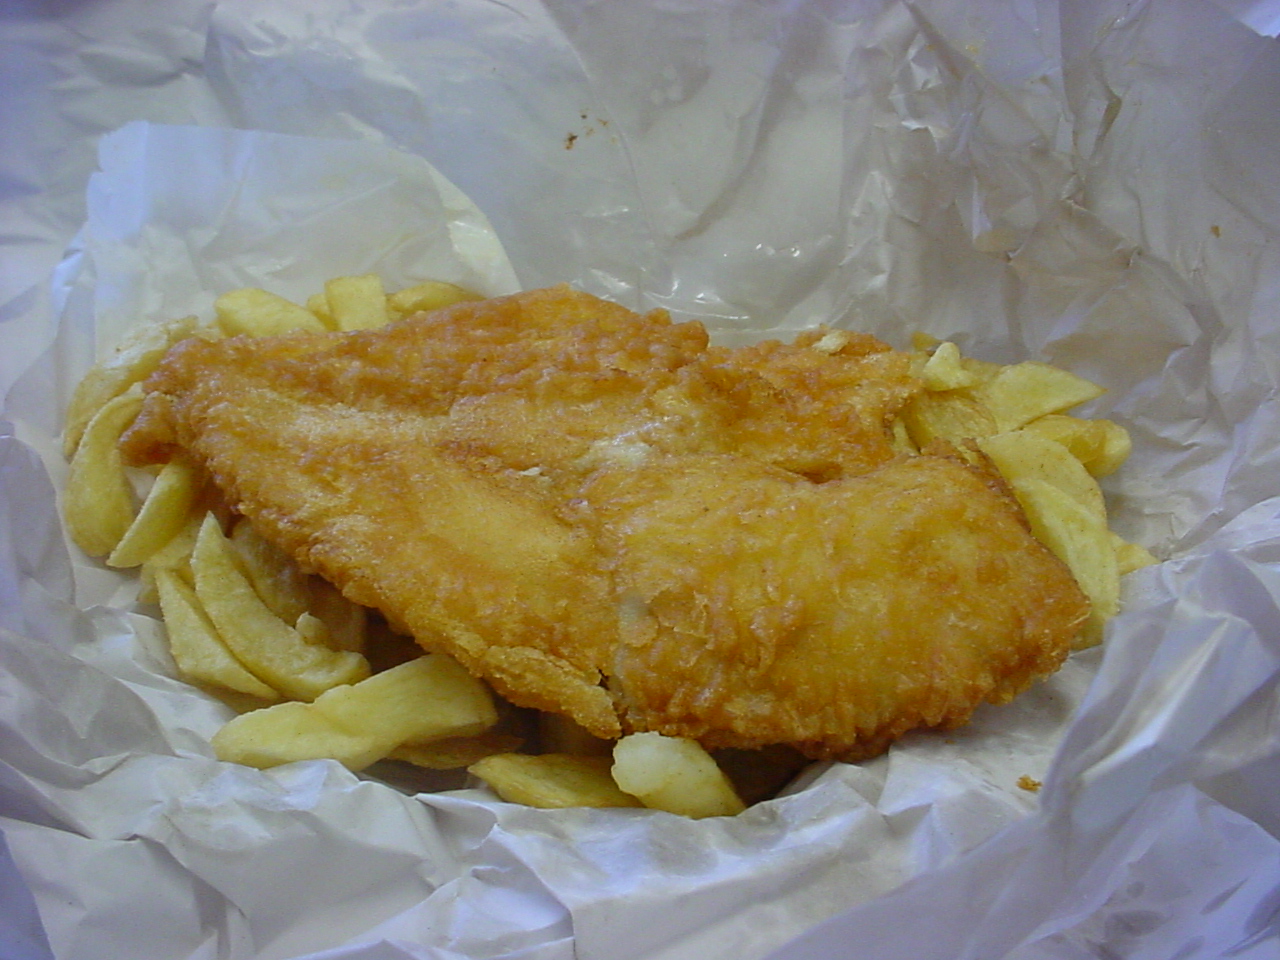 fish and chips are in paper wrapping